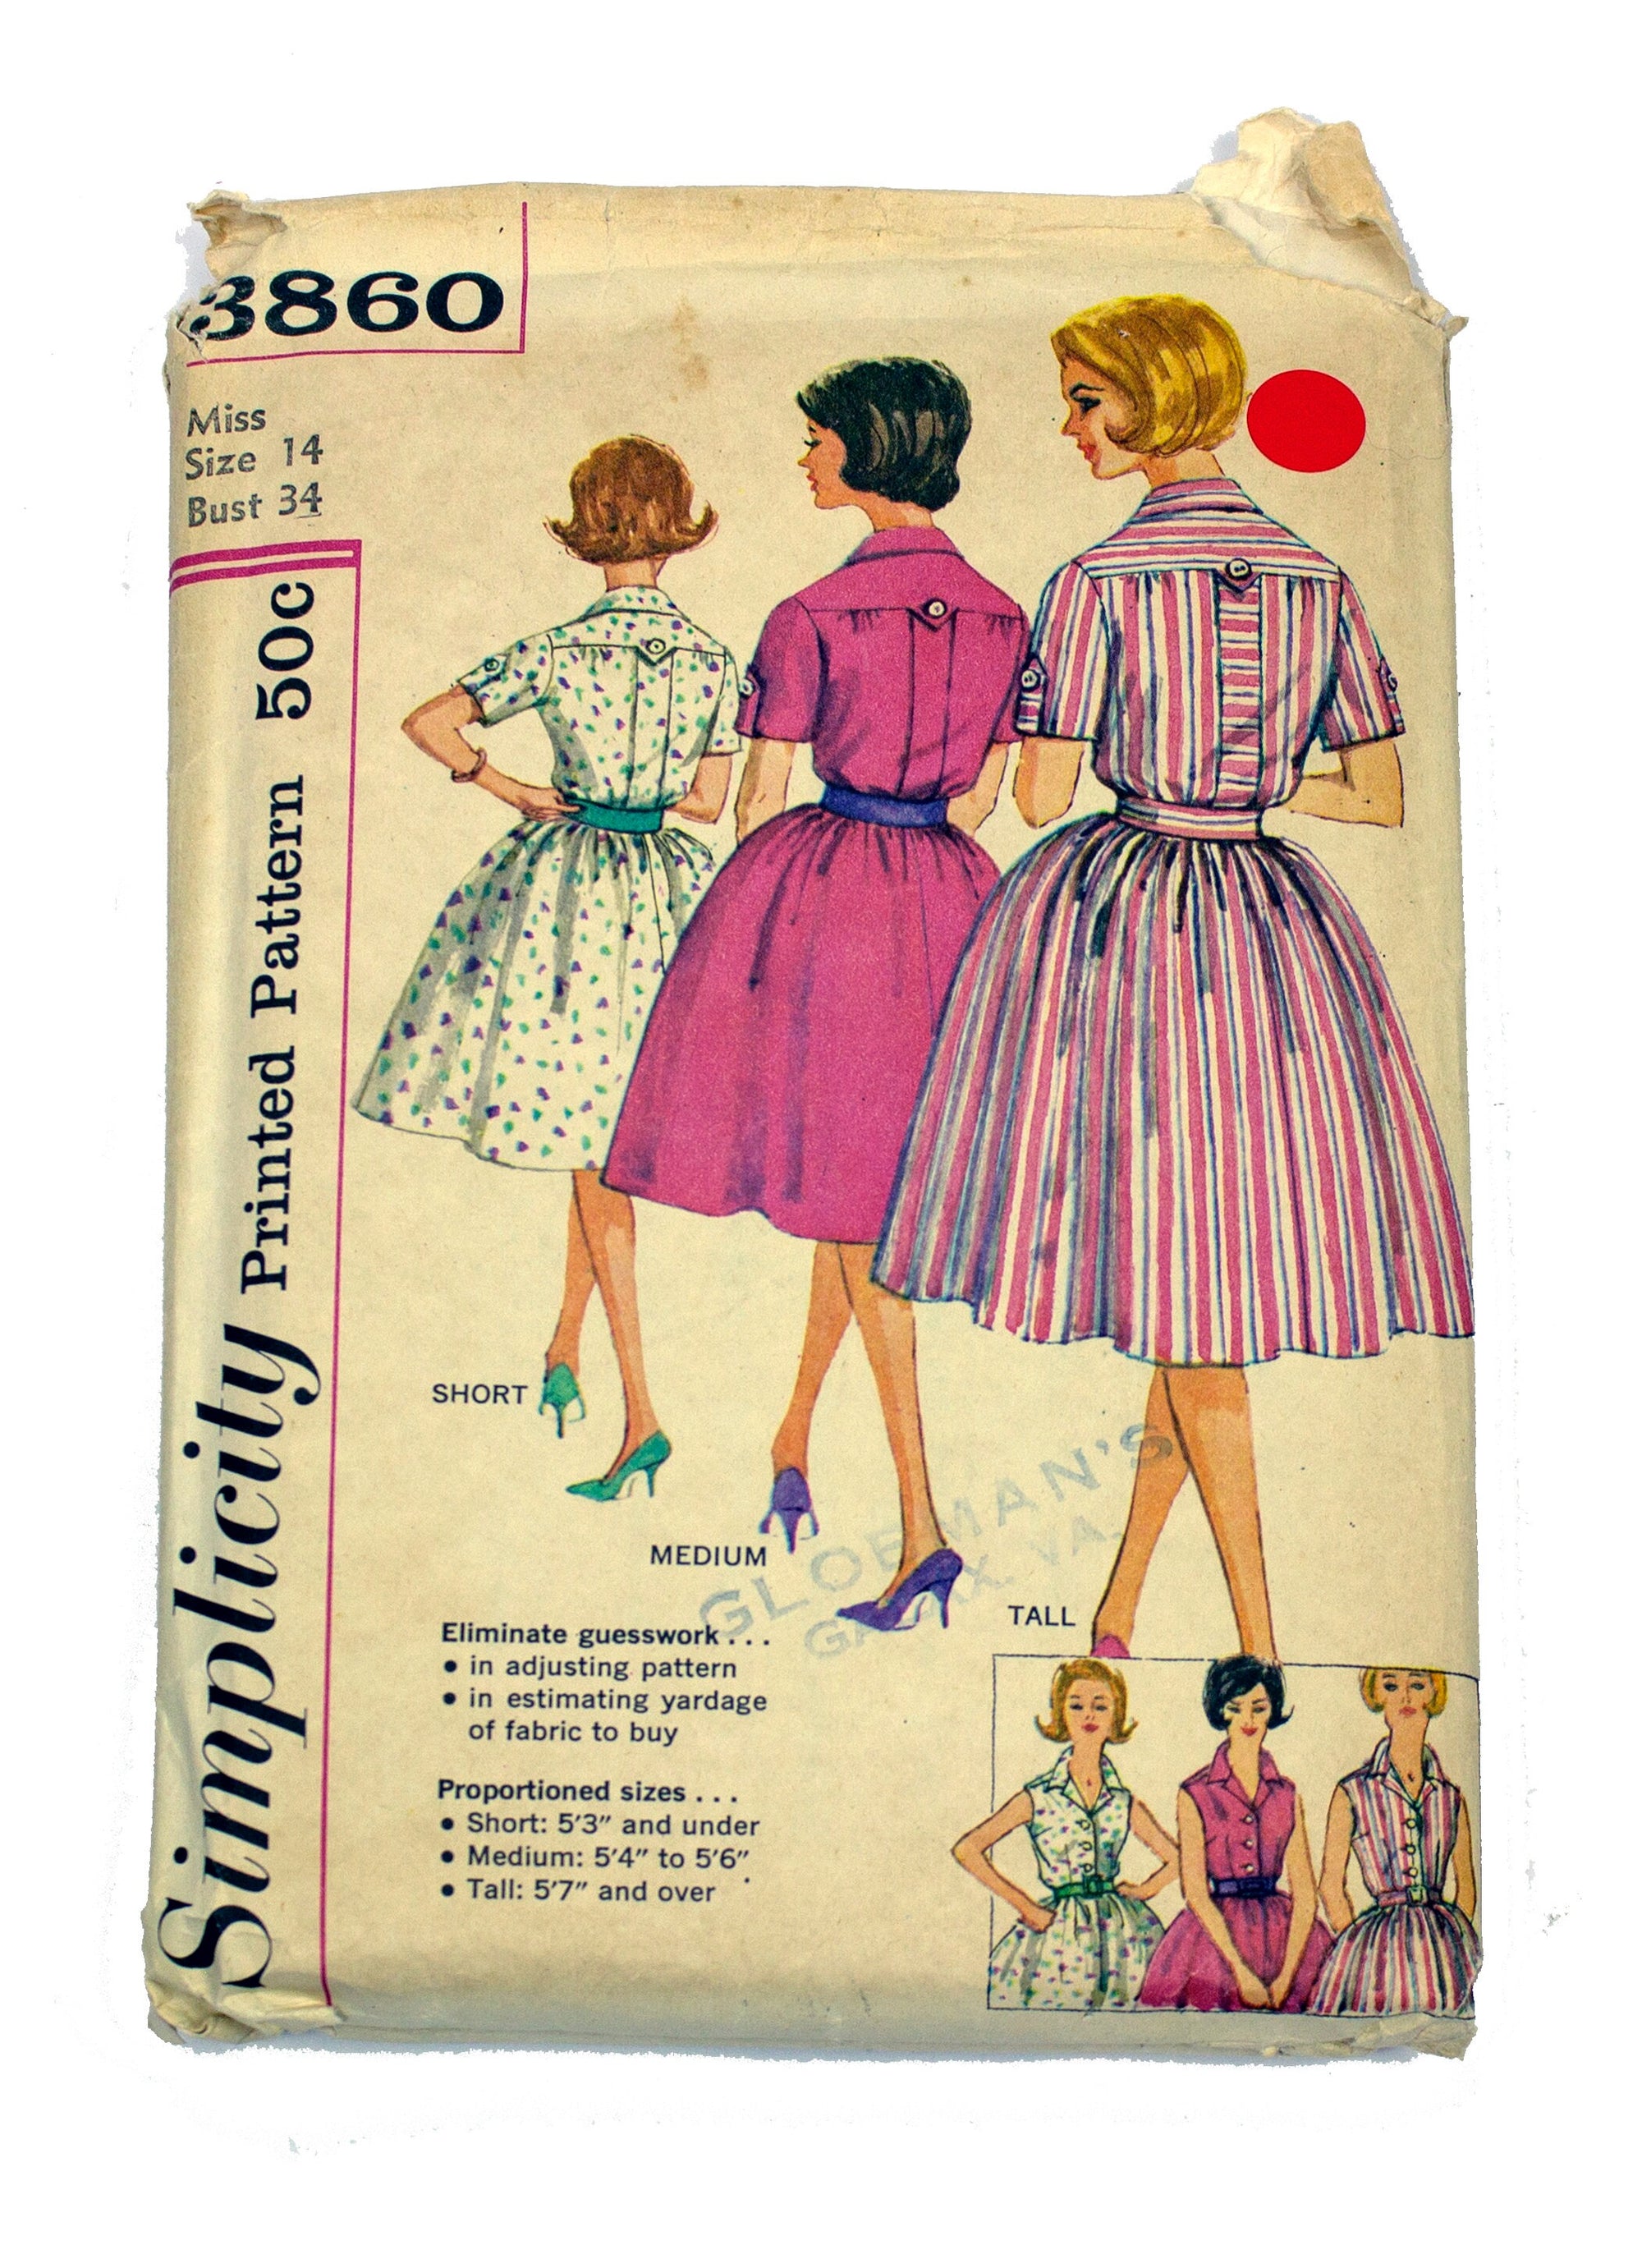 Simplicity 3860 Women's Dress in Proportioned Sizes - Size 14 Bust 34